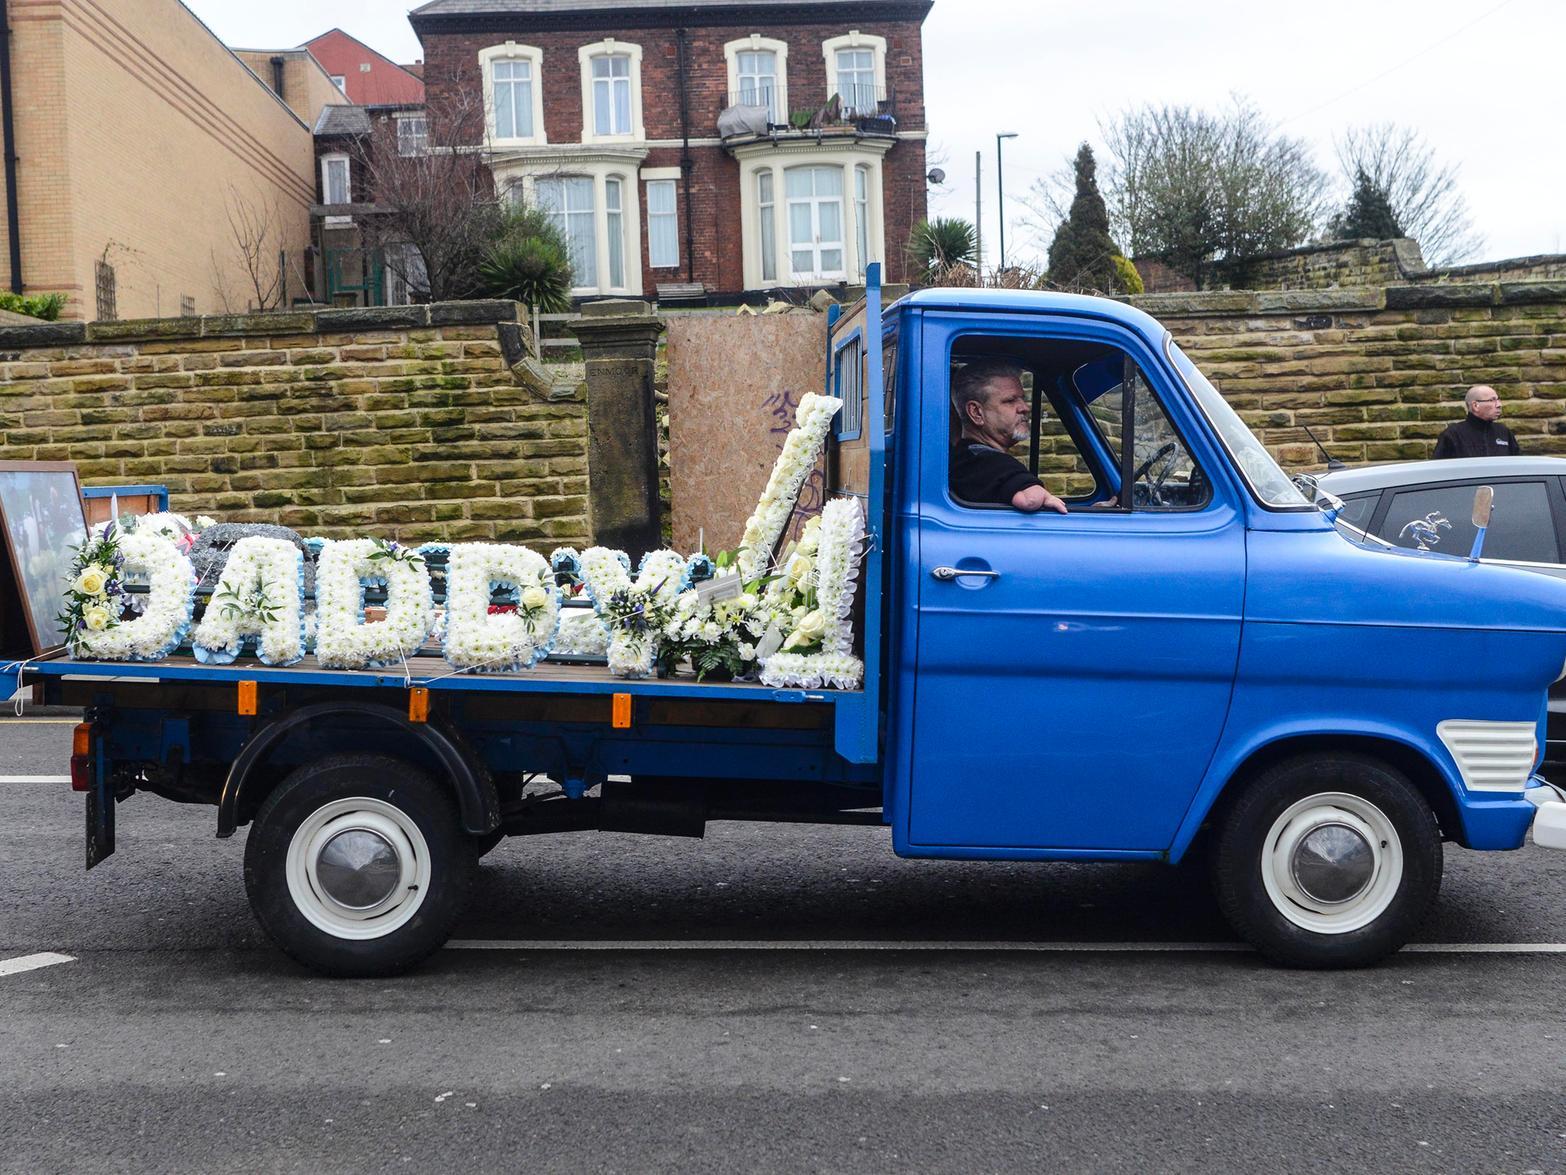 'Daddy' floral tributes cc SWNS